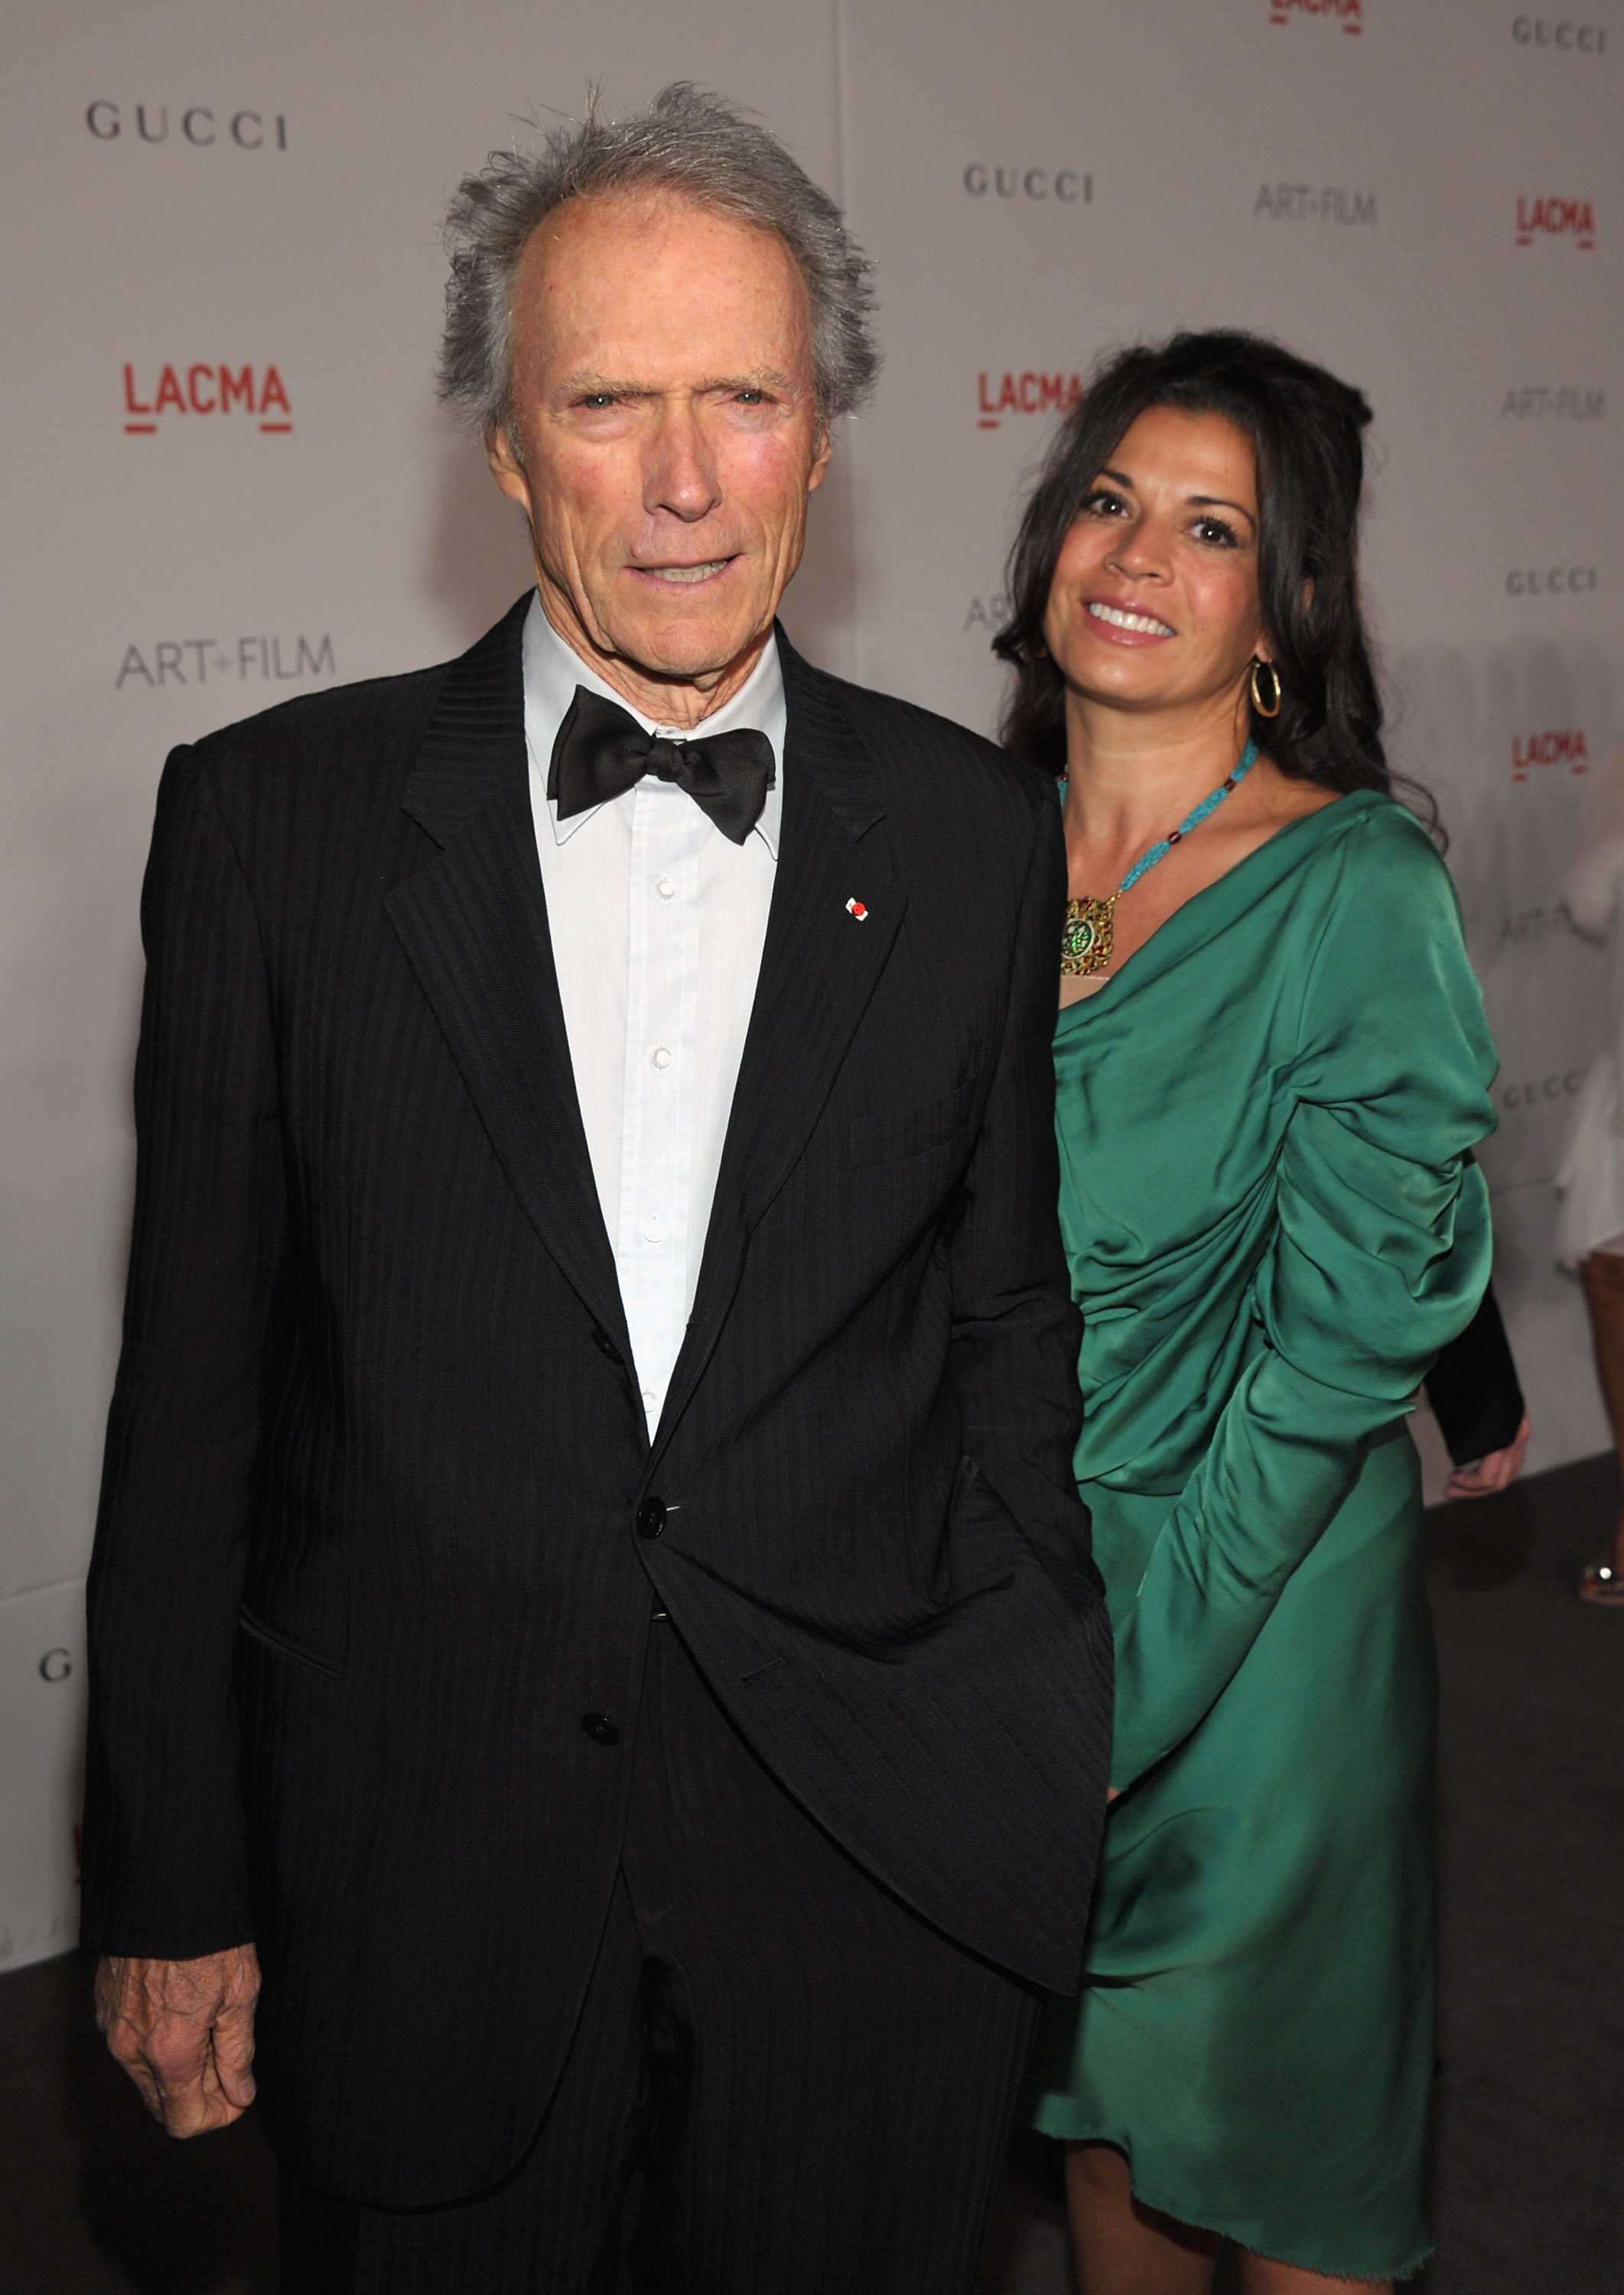 Clint Eastwood and Dina Eastwood attends LACMA Art + Film Gala in Los Angeles, California on November 5, 2011 | Photo: Getty Images